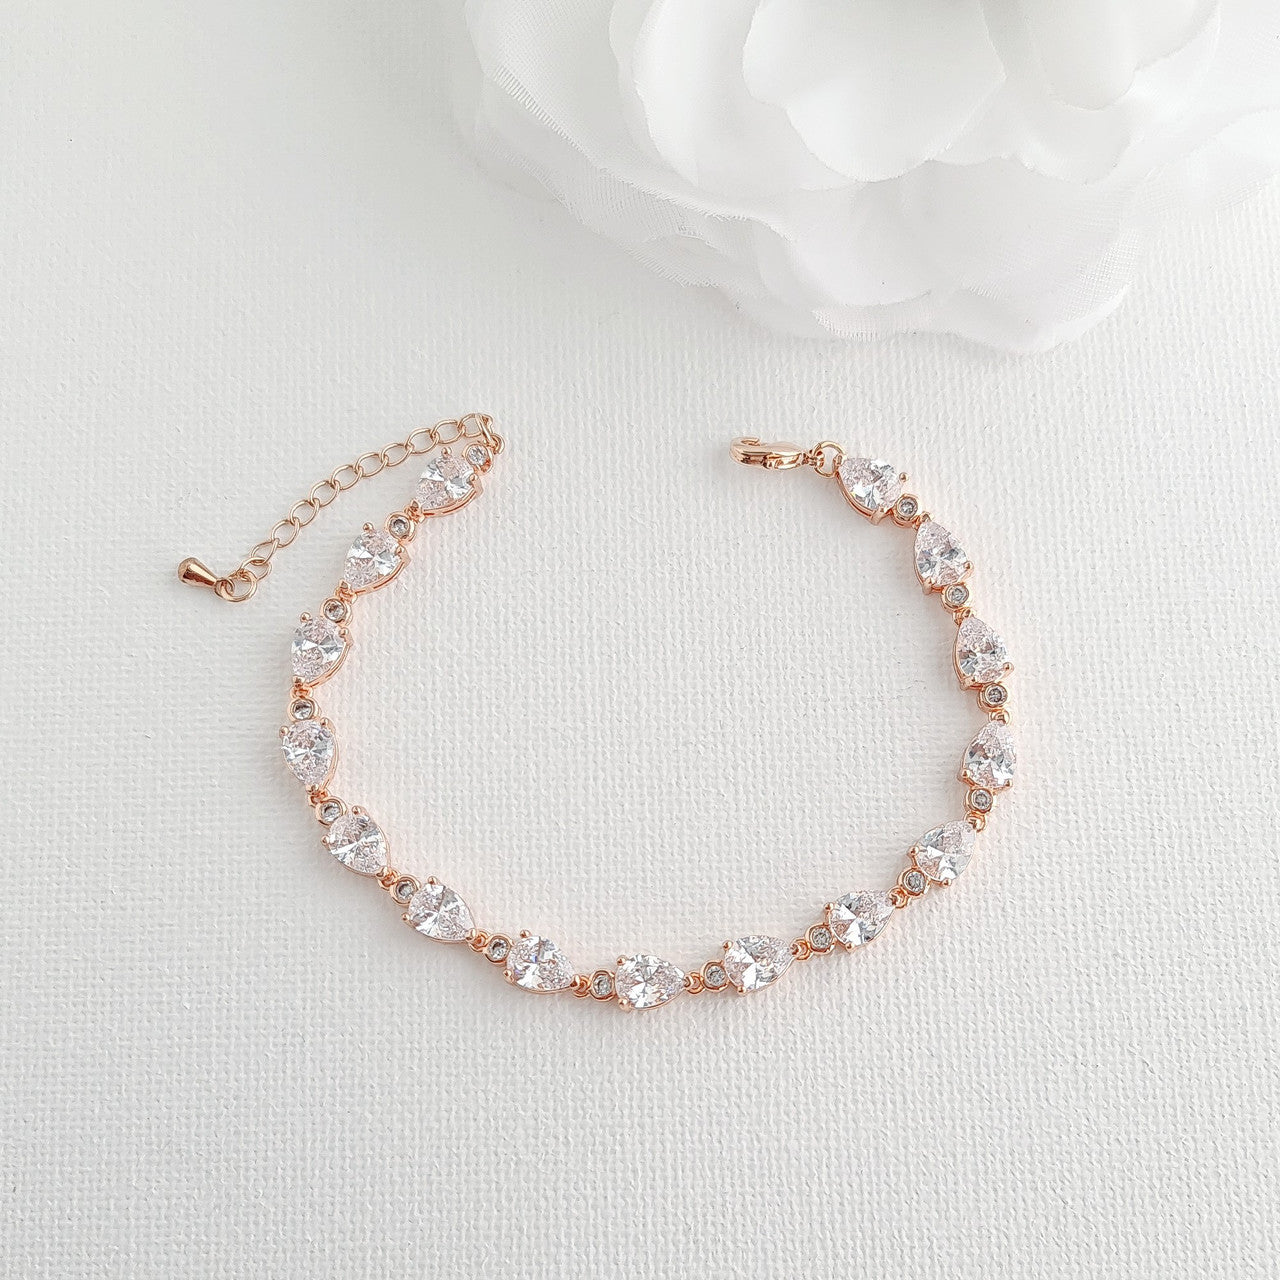 Pear and Round Shaped Bridal Bracelet- Ivy